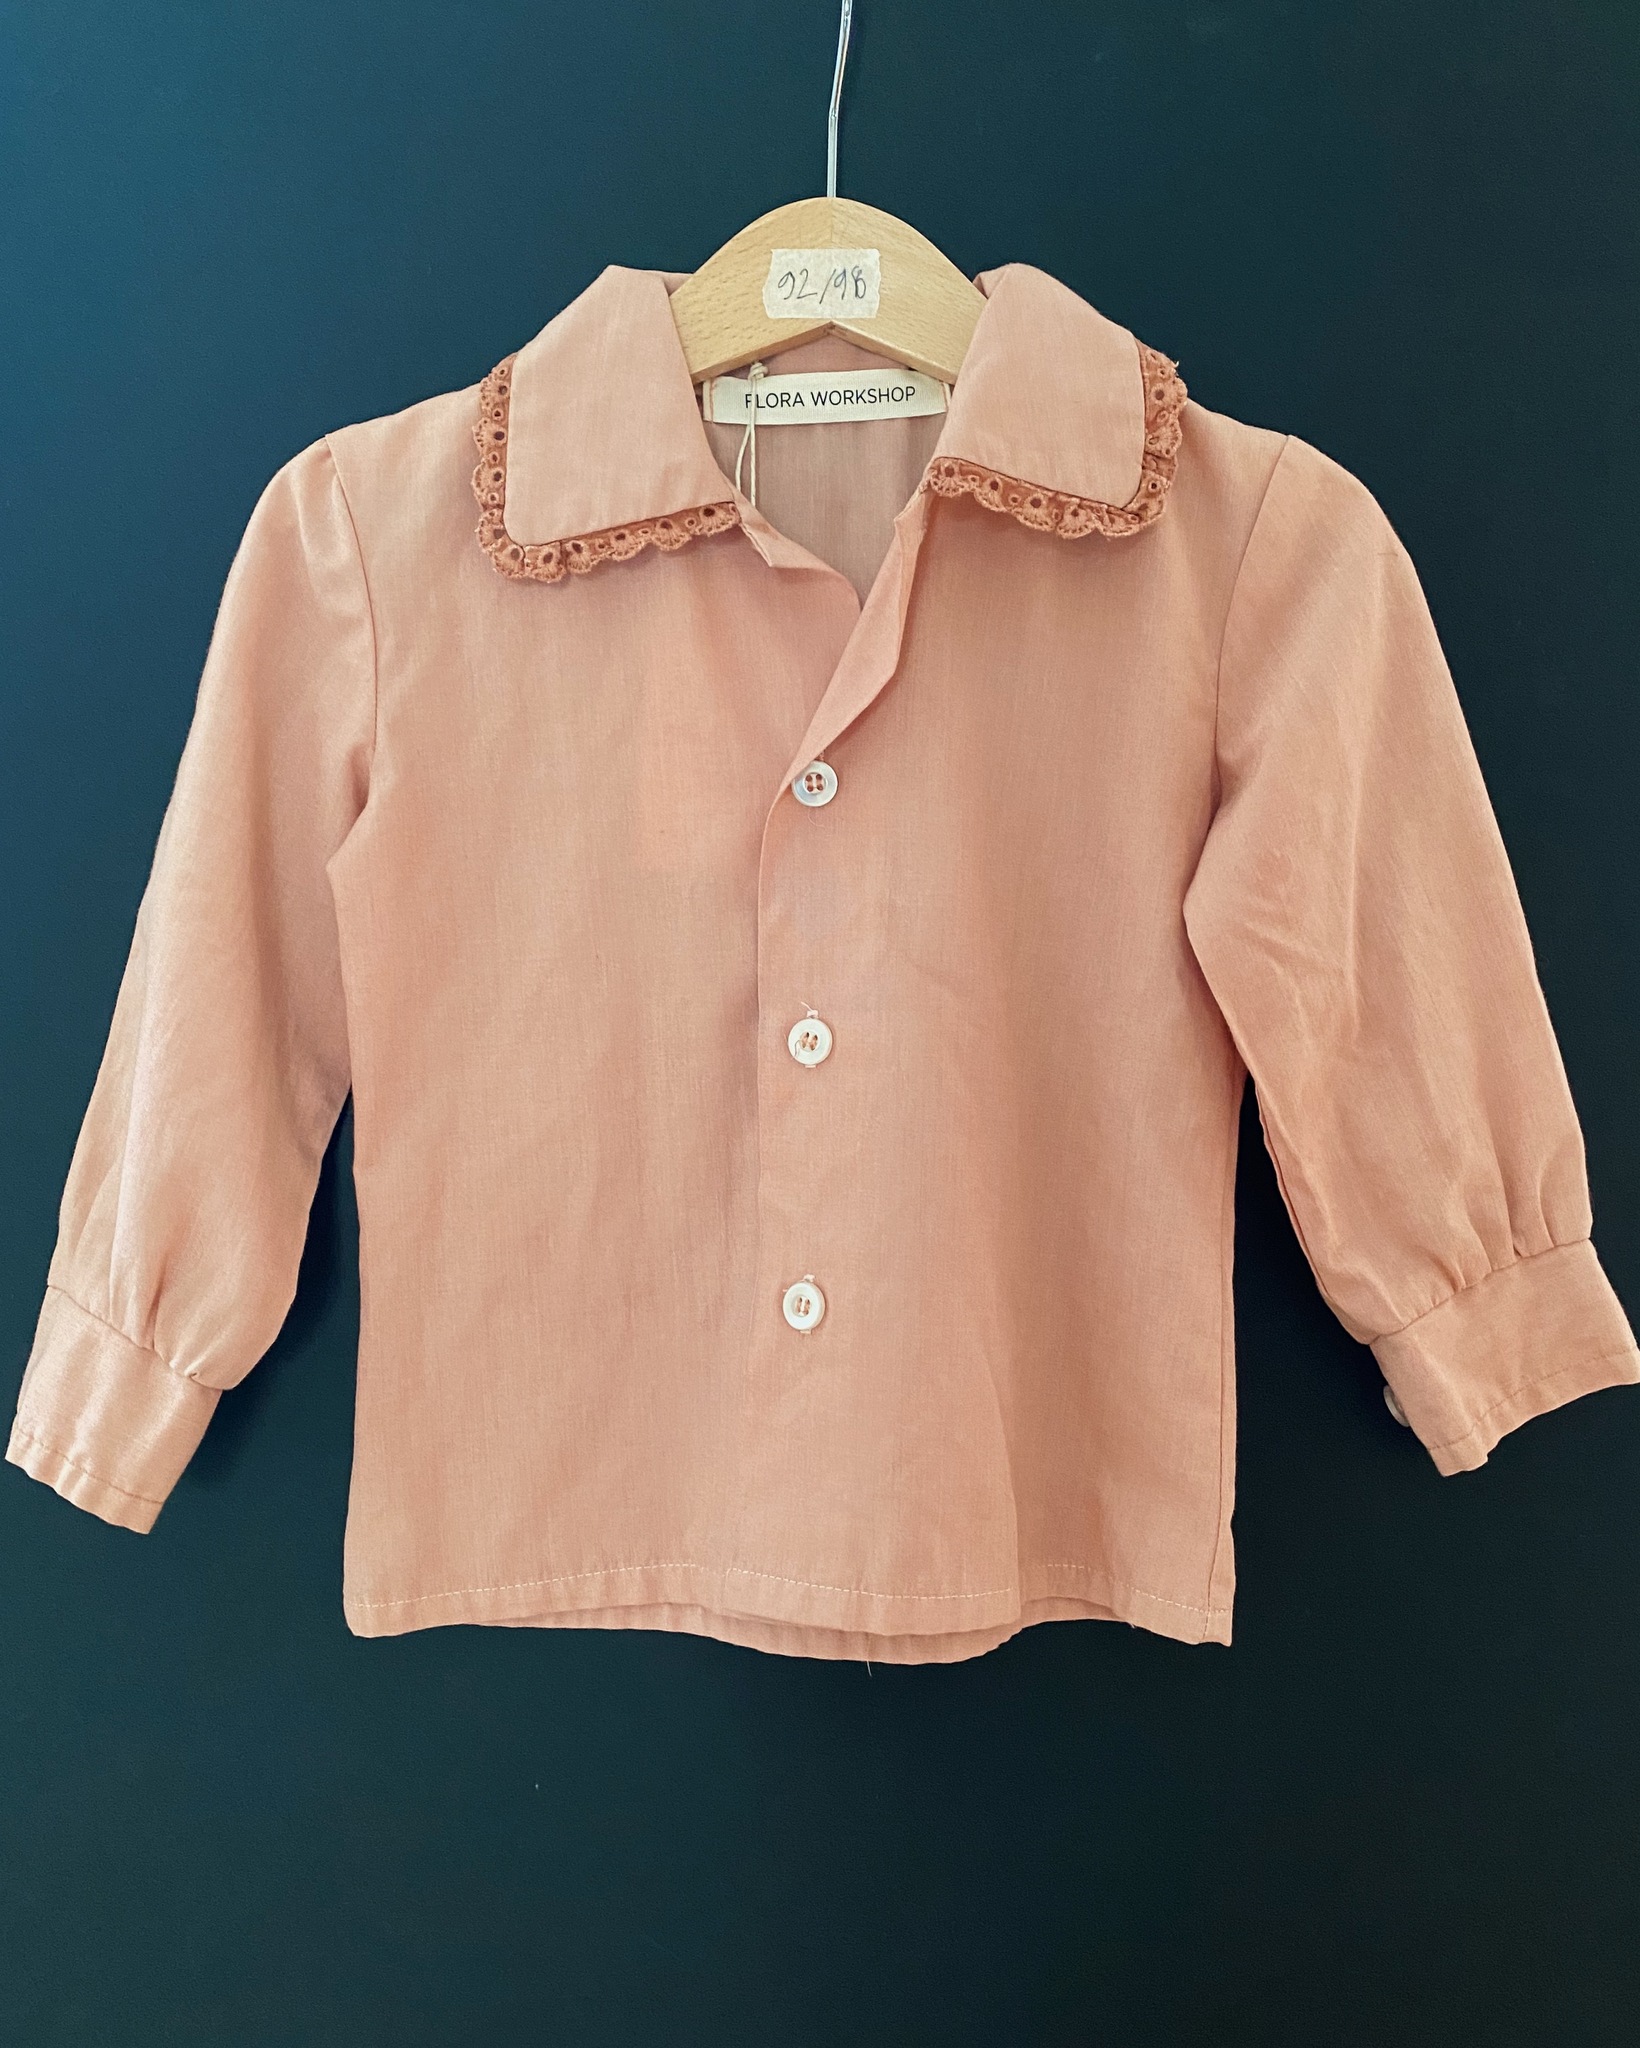 REMADE Blouse size 92/98 - Wooden blush